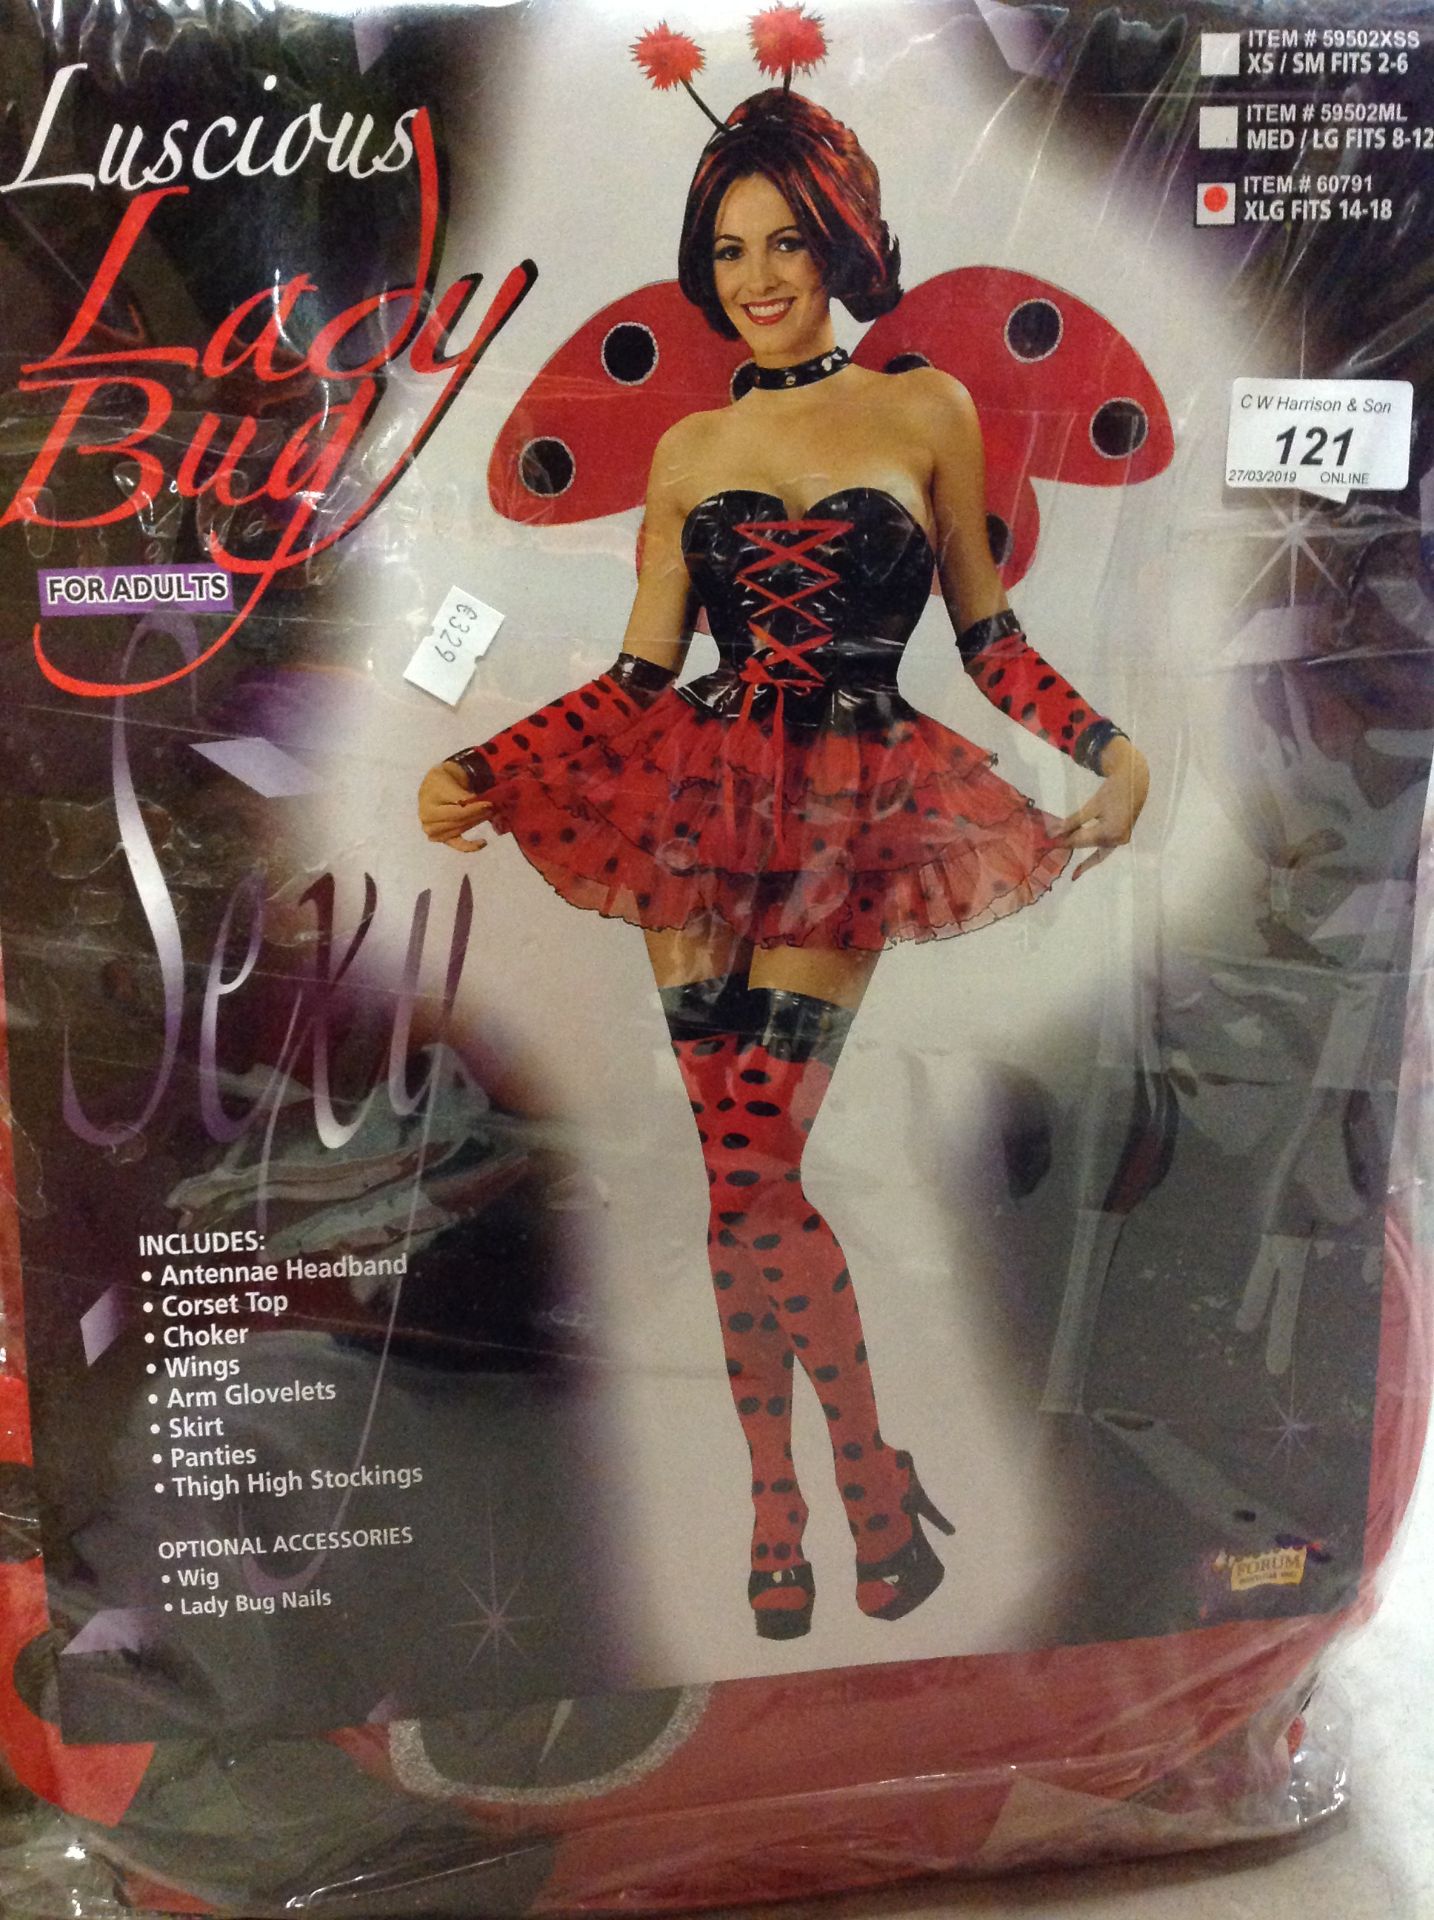 13 x adult luscious lady bug costumes by Forum Novelties Inc size L-XL - please note blue crates